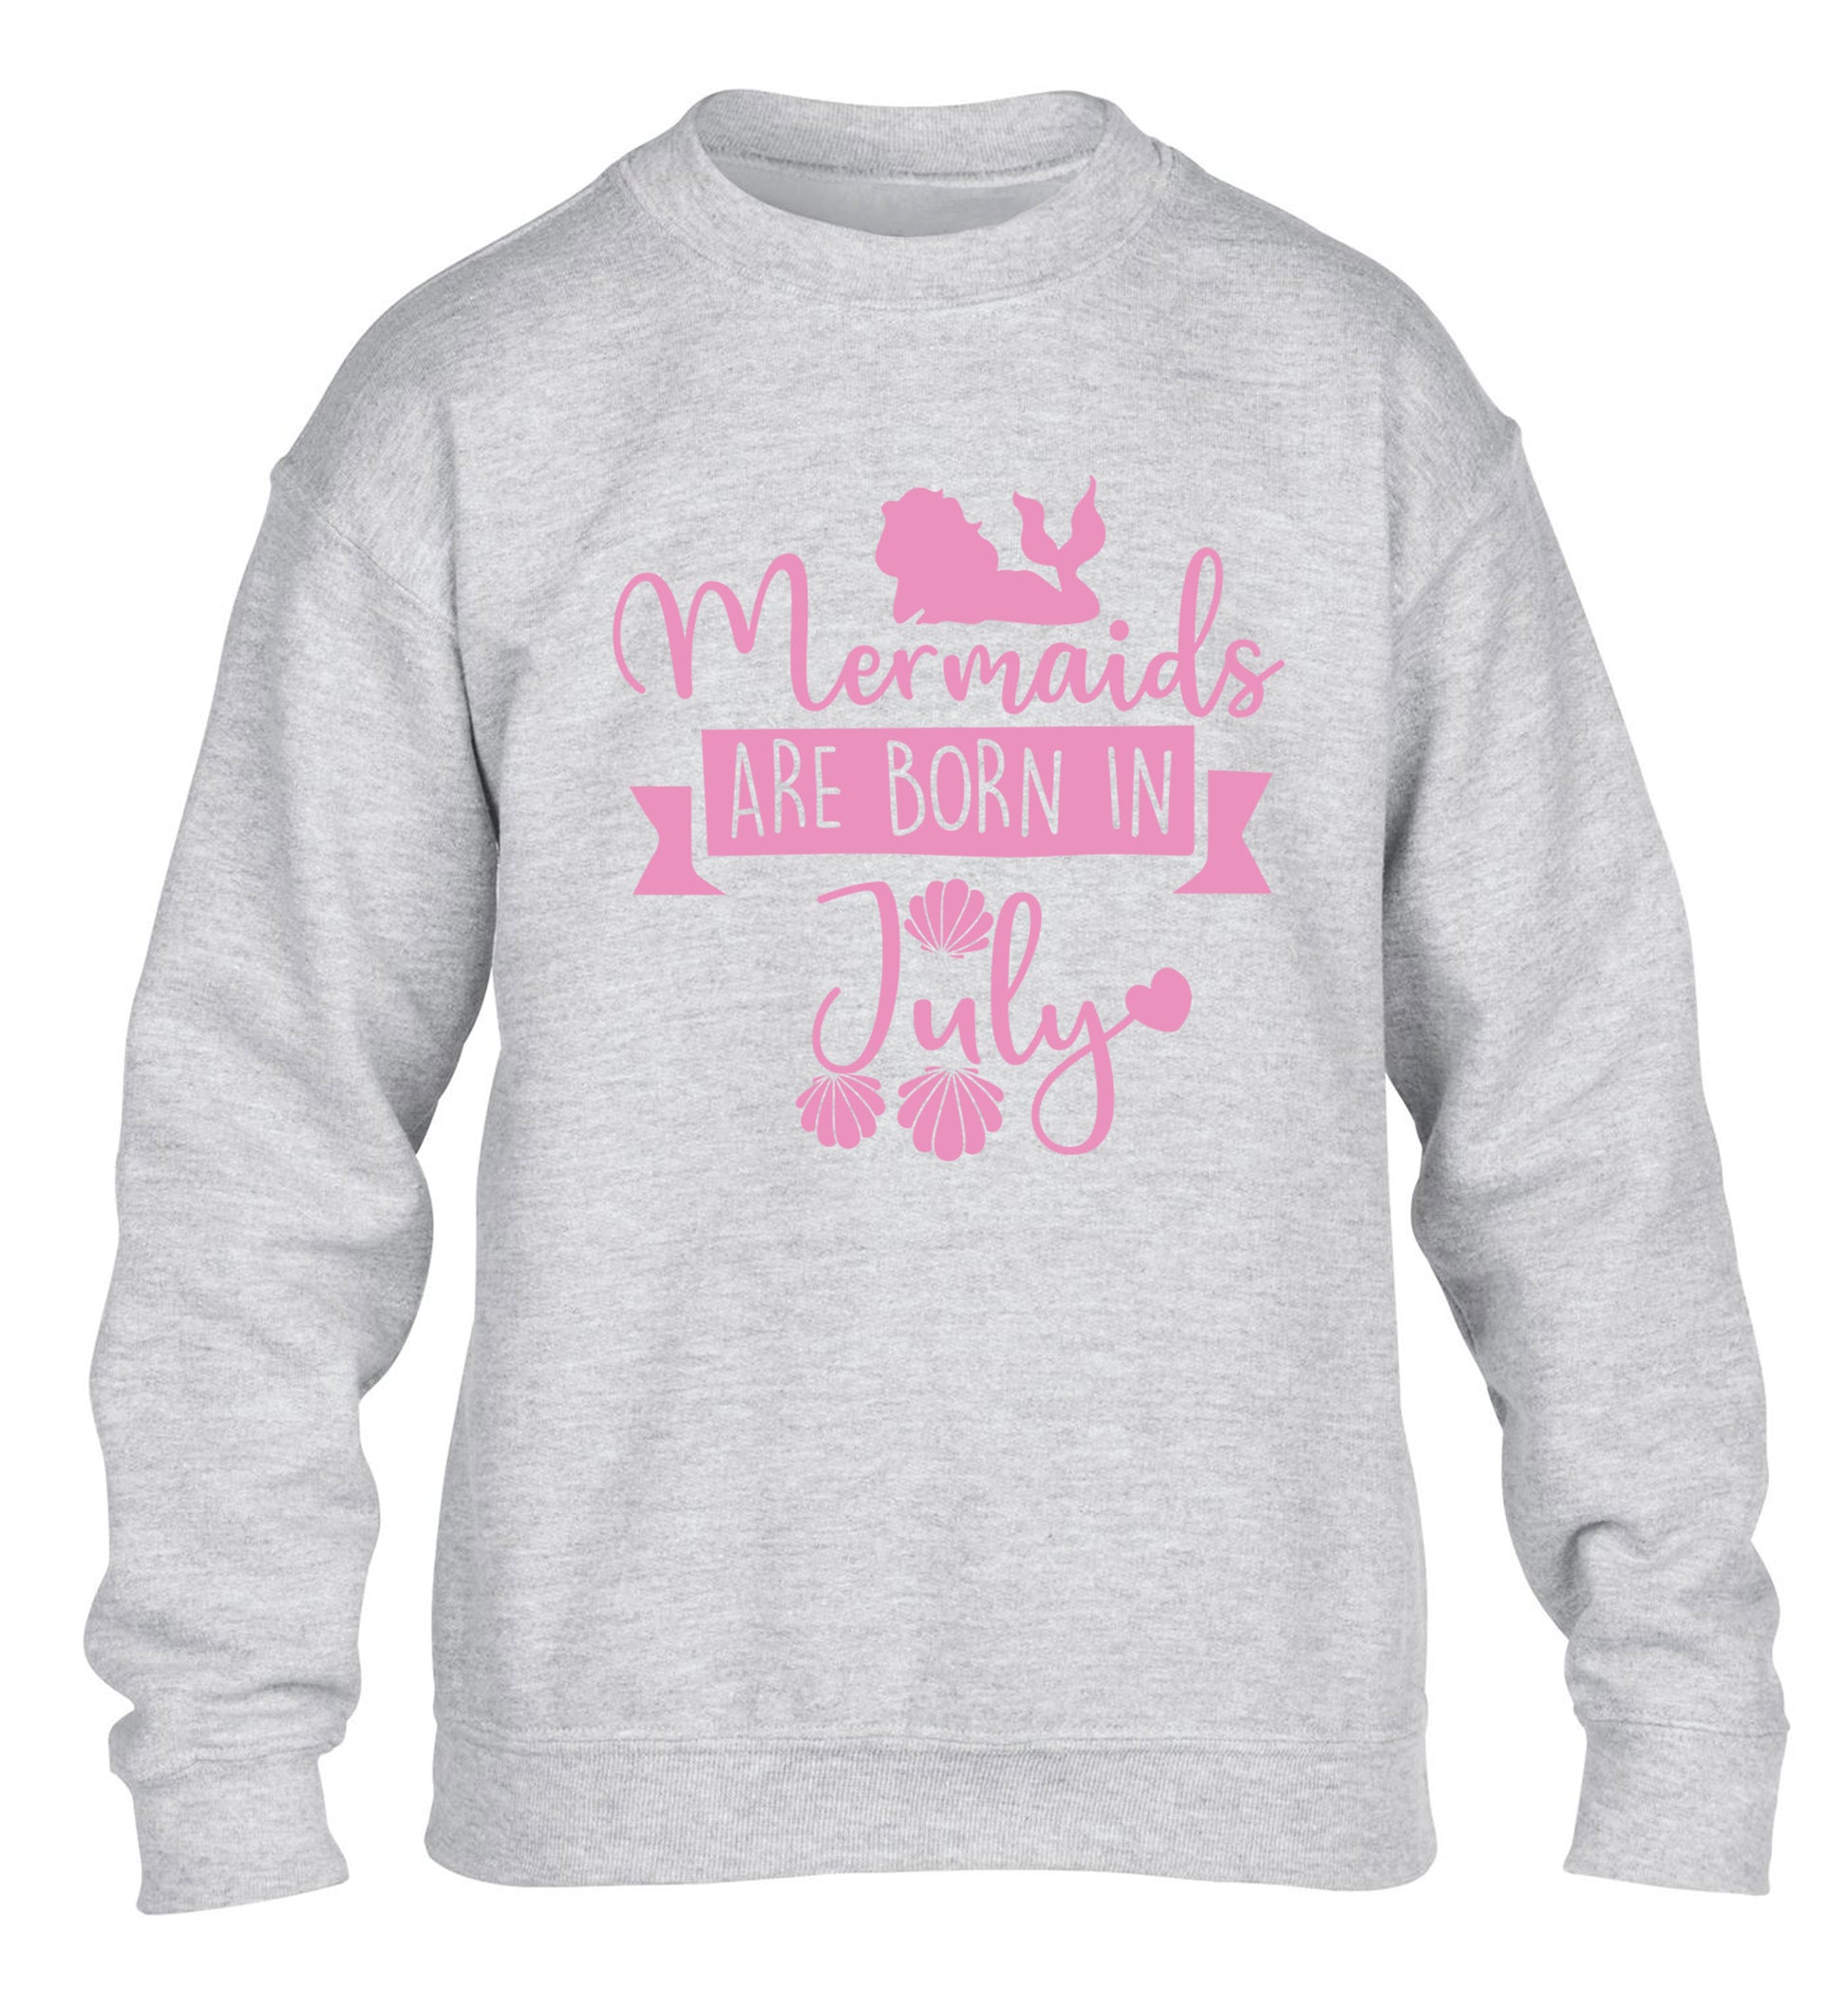 Mermaids are born in July children's grey sweater 12-13 Years